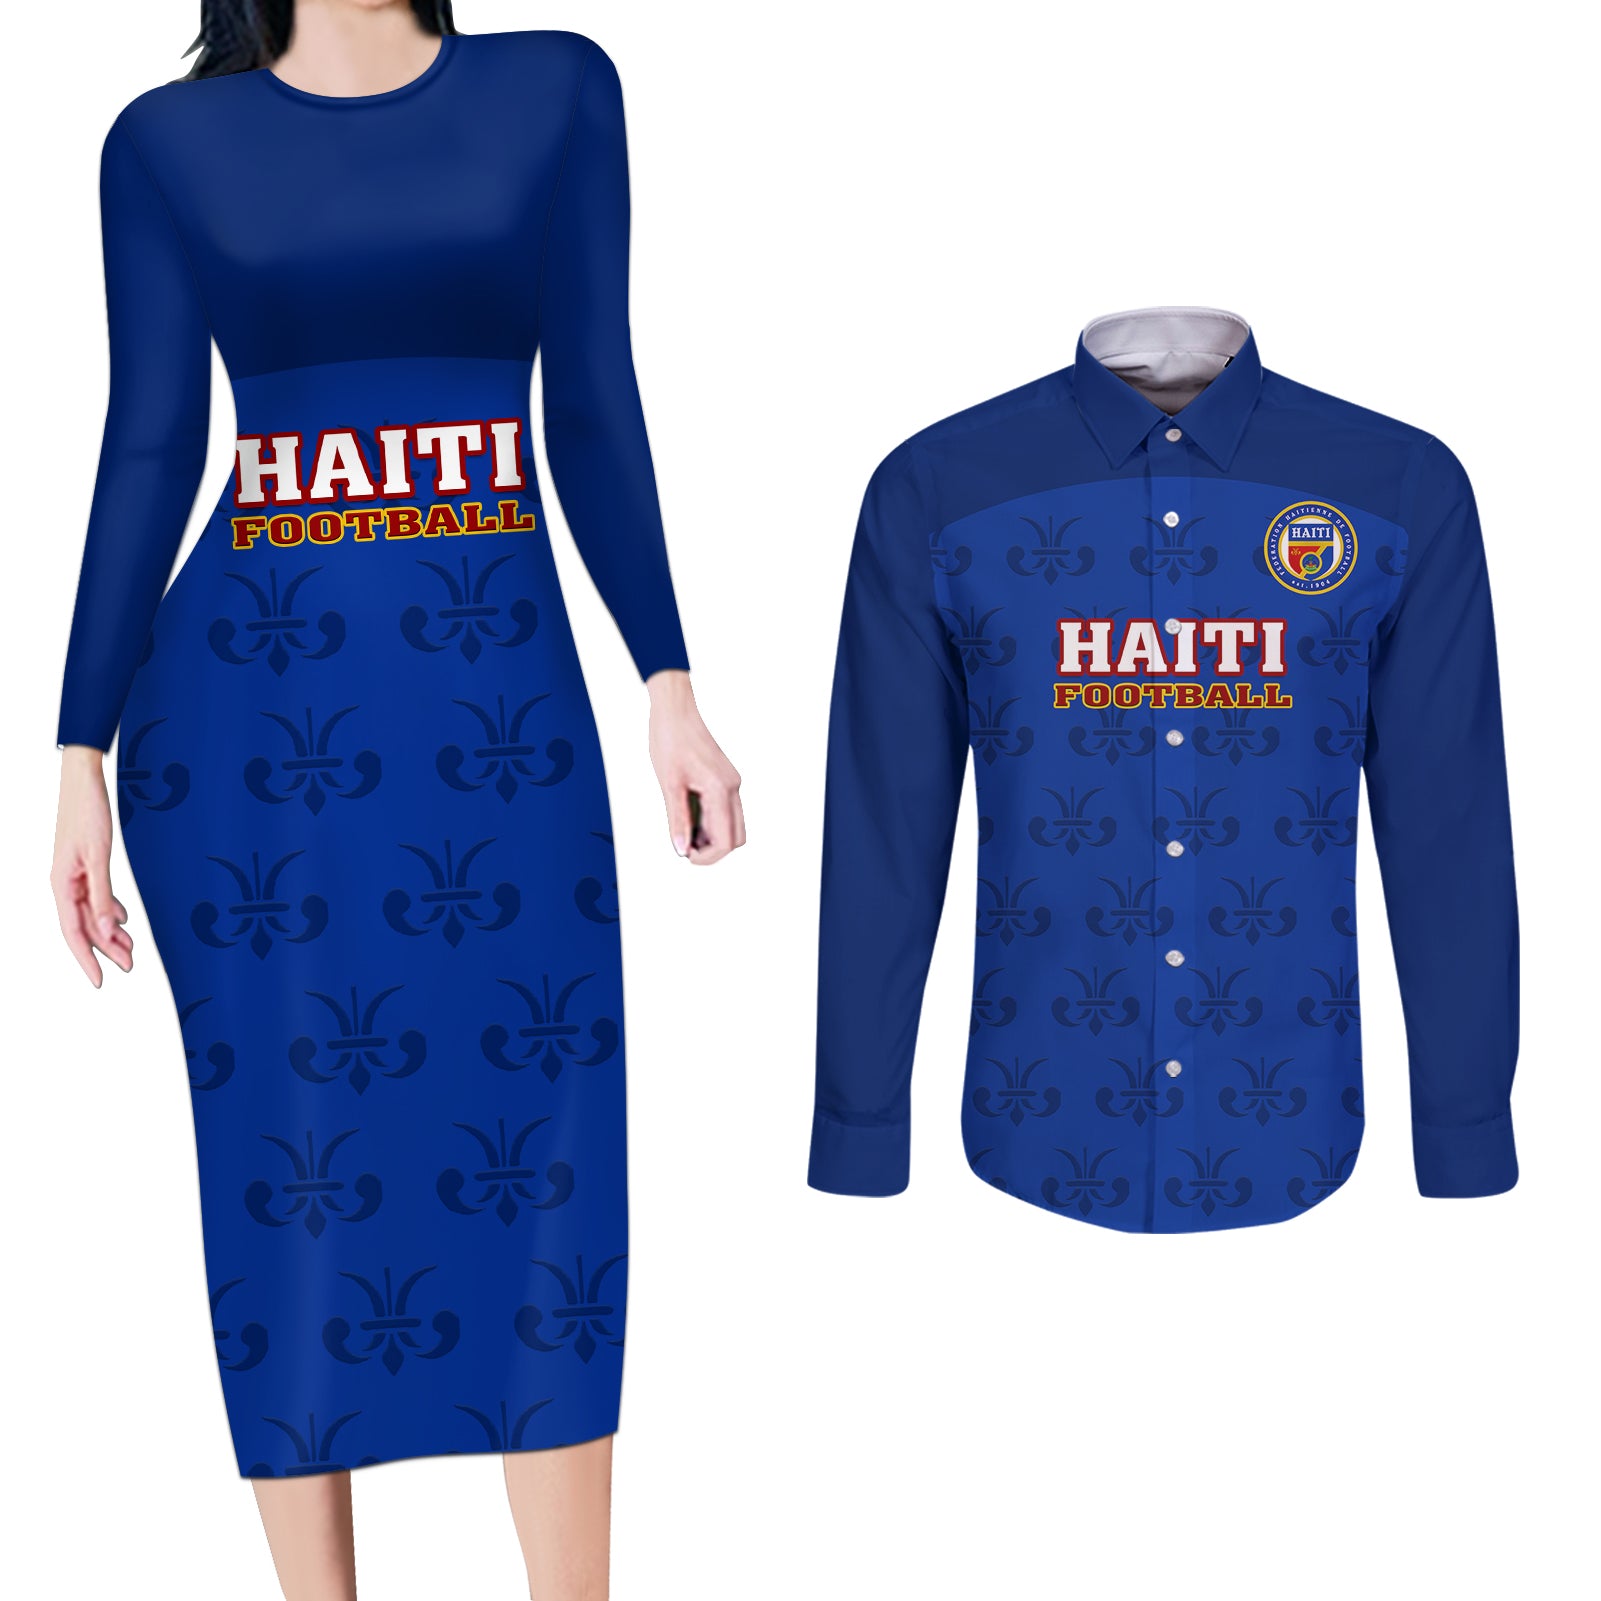 haiti-football-couples-matching-long-sleeve-bodycon-dress-and-long-sleeve-button-shirts-les-grenadieres-2023-world-cup-blue-version